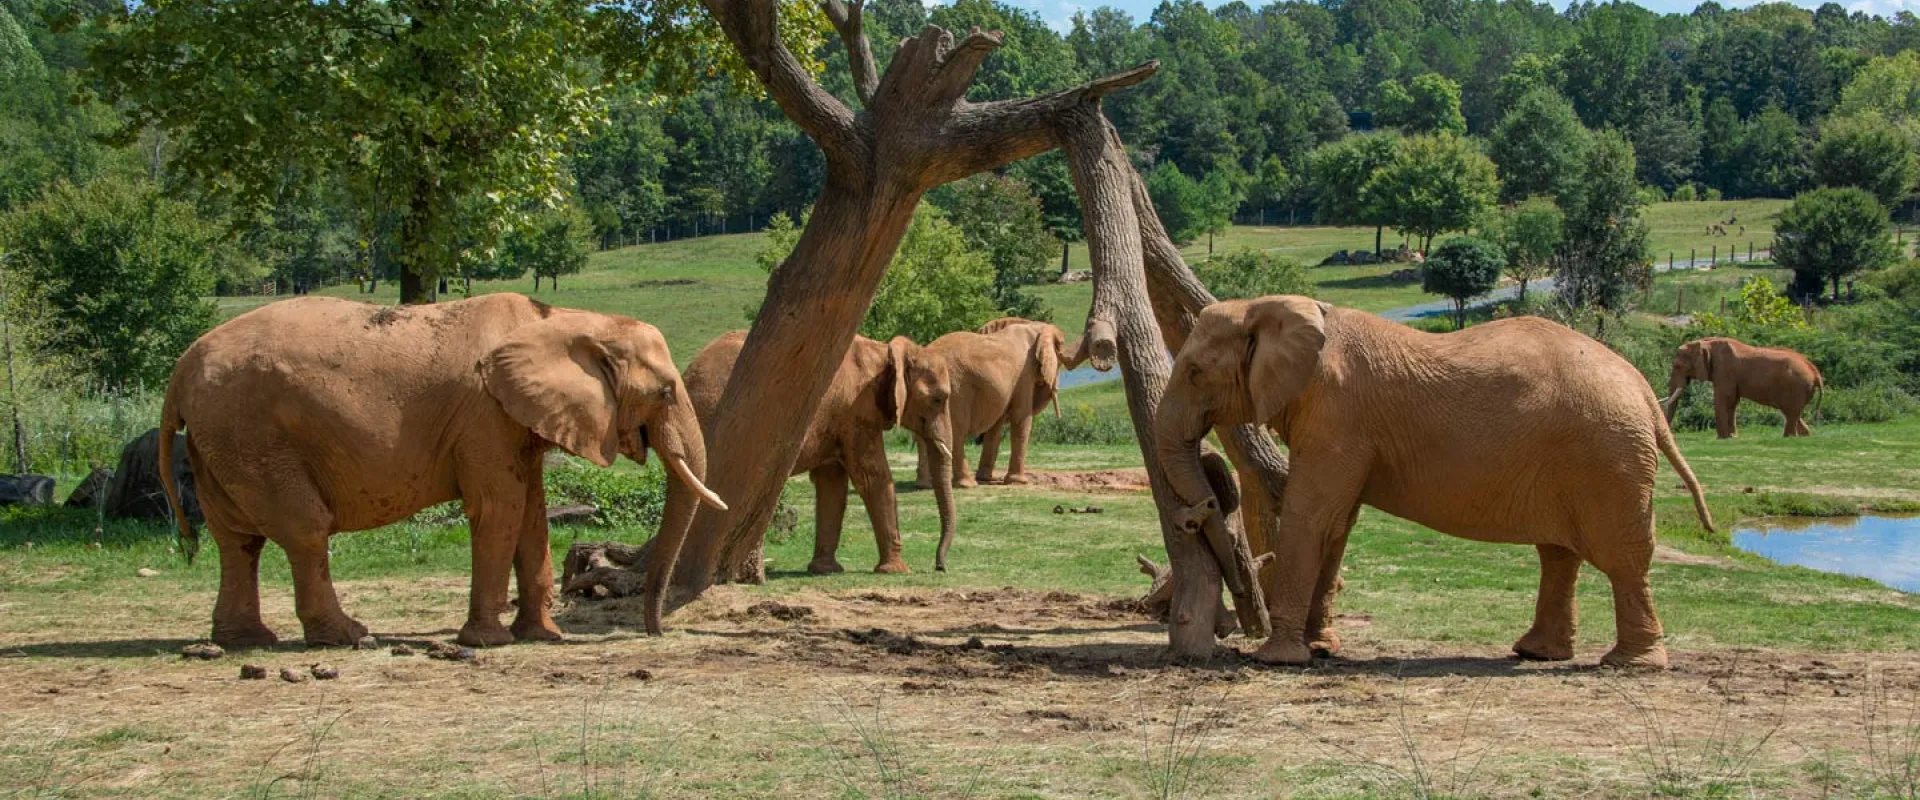 North Carolina Zoo Offering Special Discount Admission for Randolph County Residents Aug. 5-30